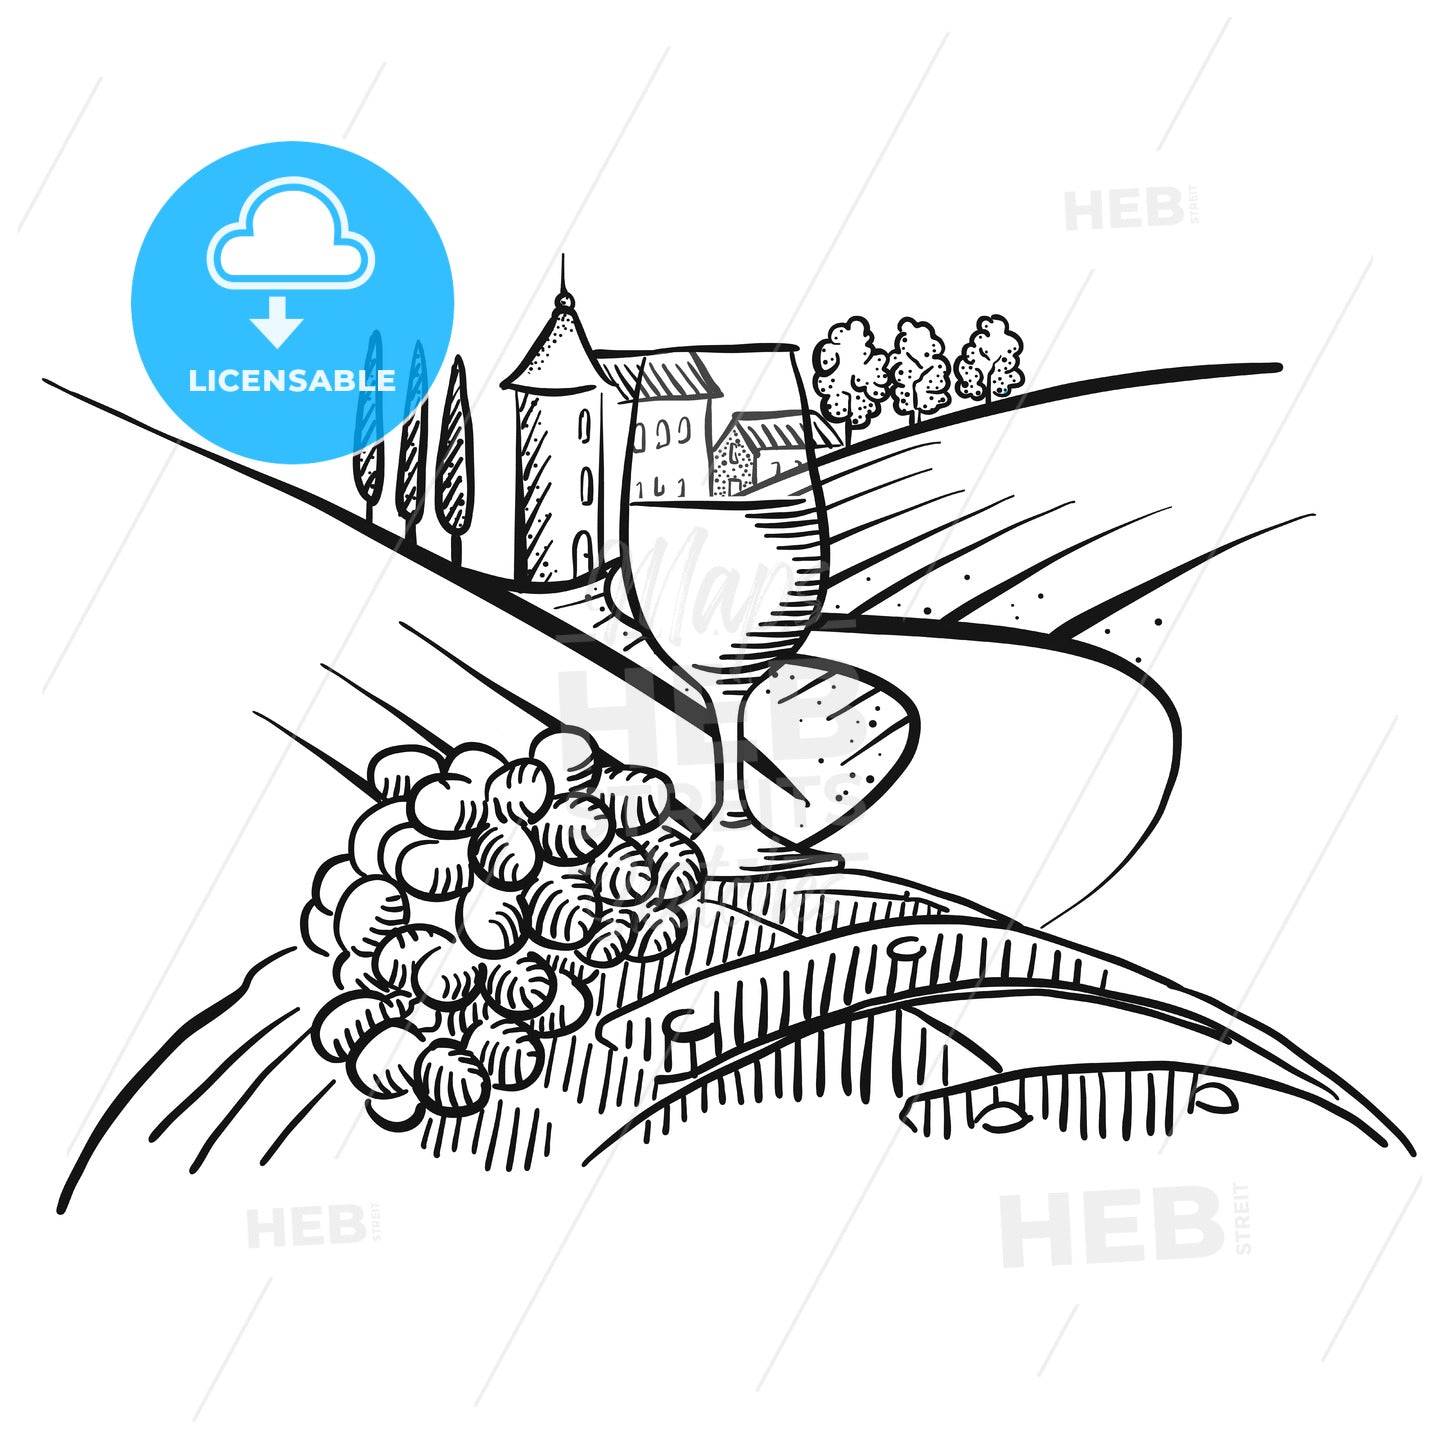 Wine and grapes in front of farmland – instant download